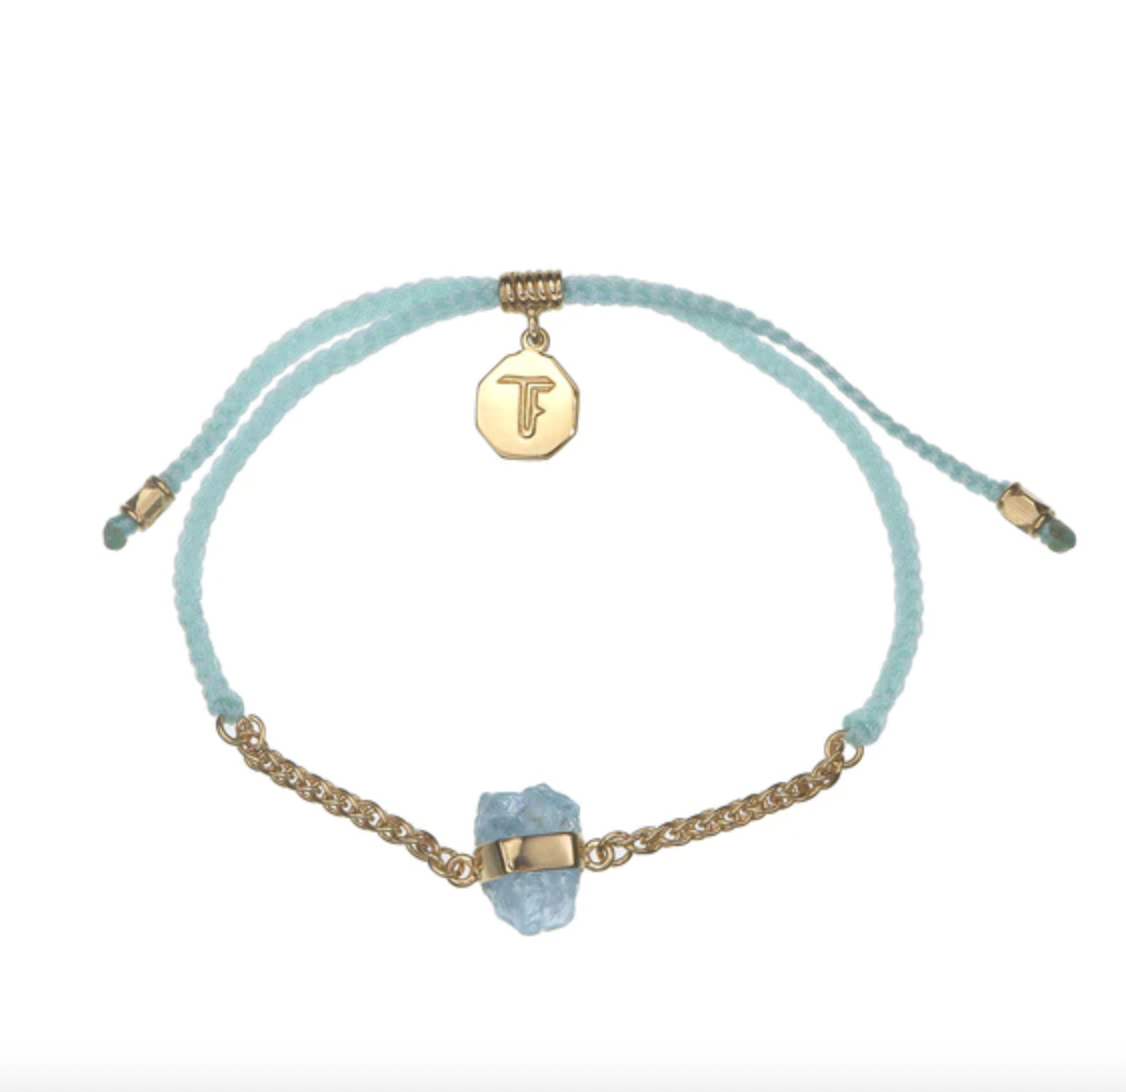 TIGER FRAME - CHAIN & CORD BLESSING BRACELET - AQUAMARINE WITH MINT - GOLD